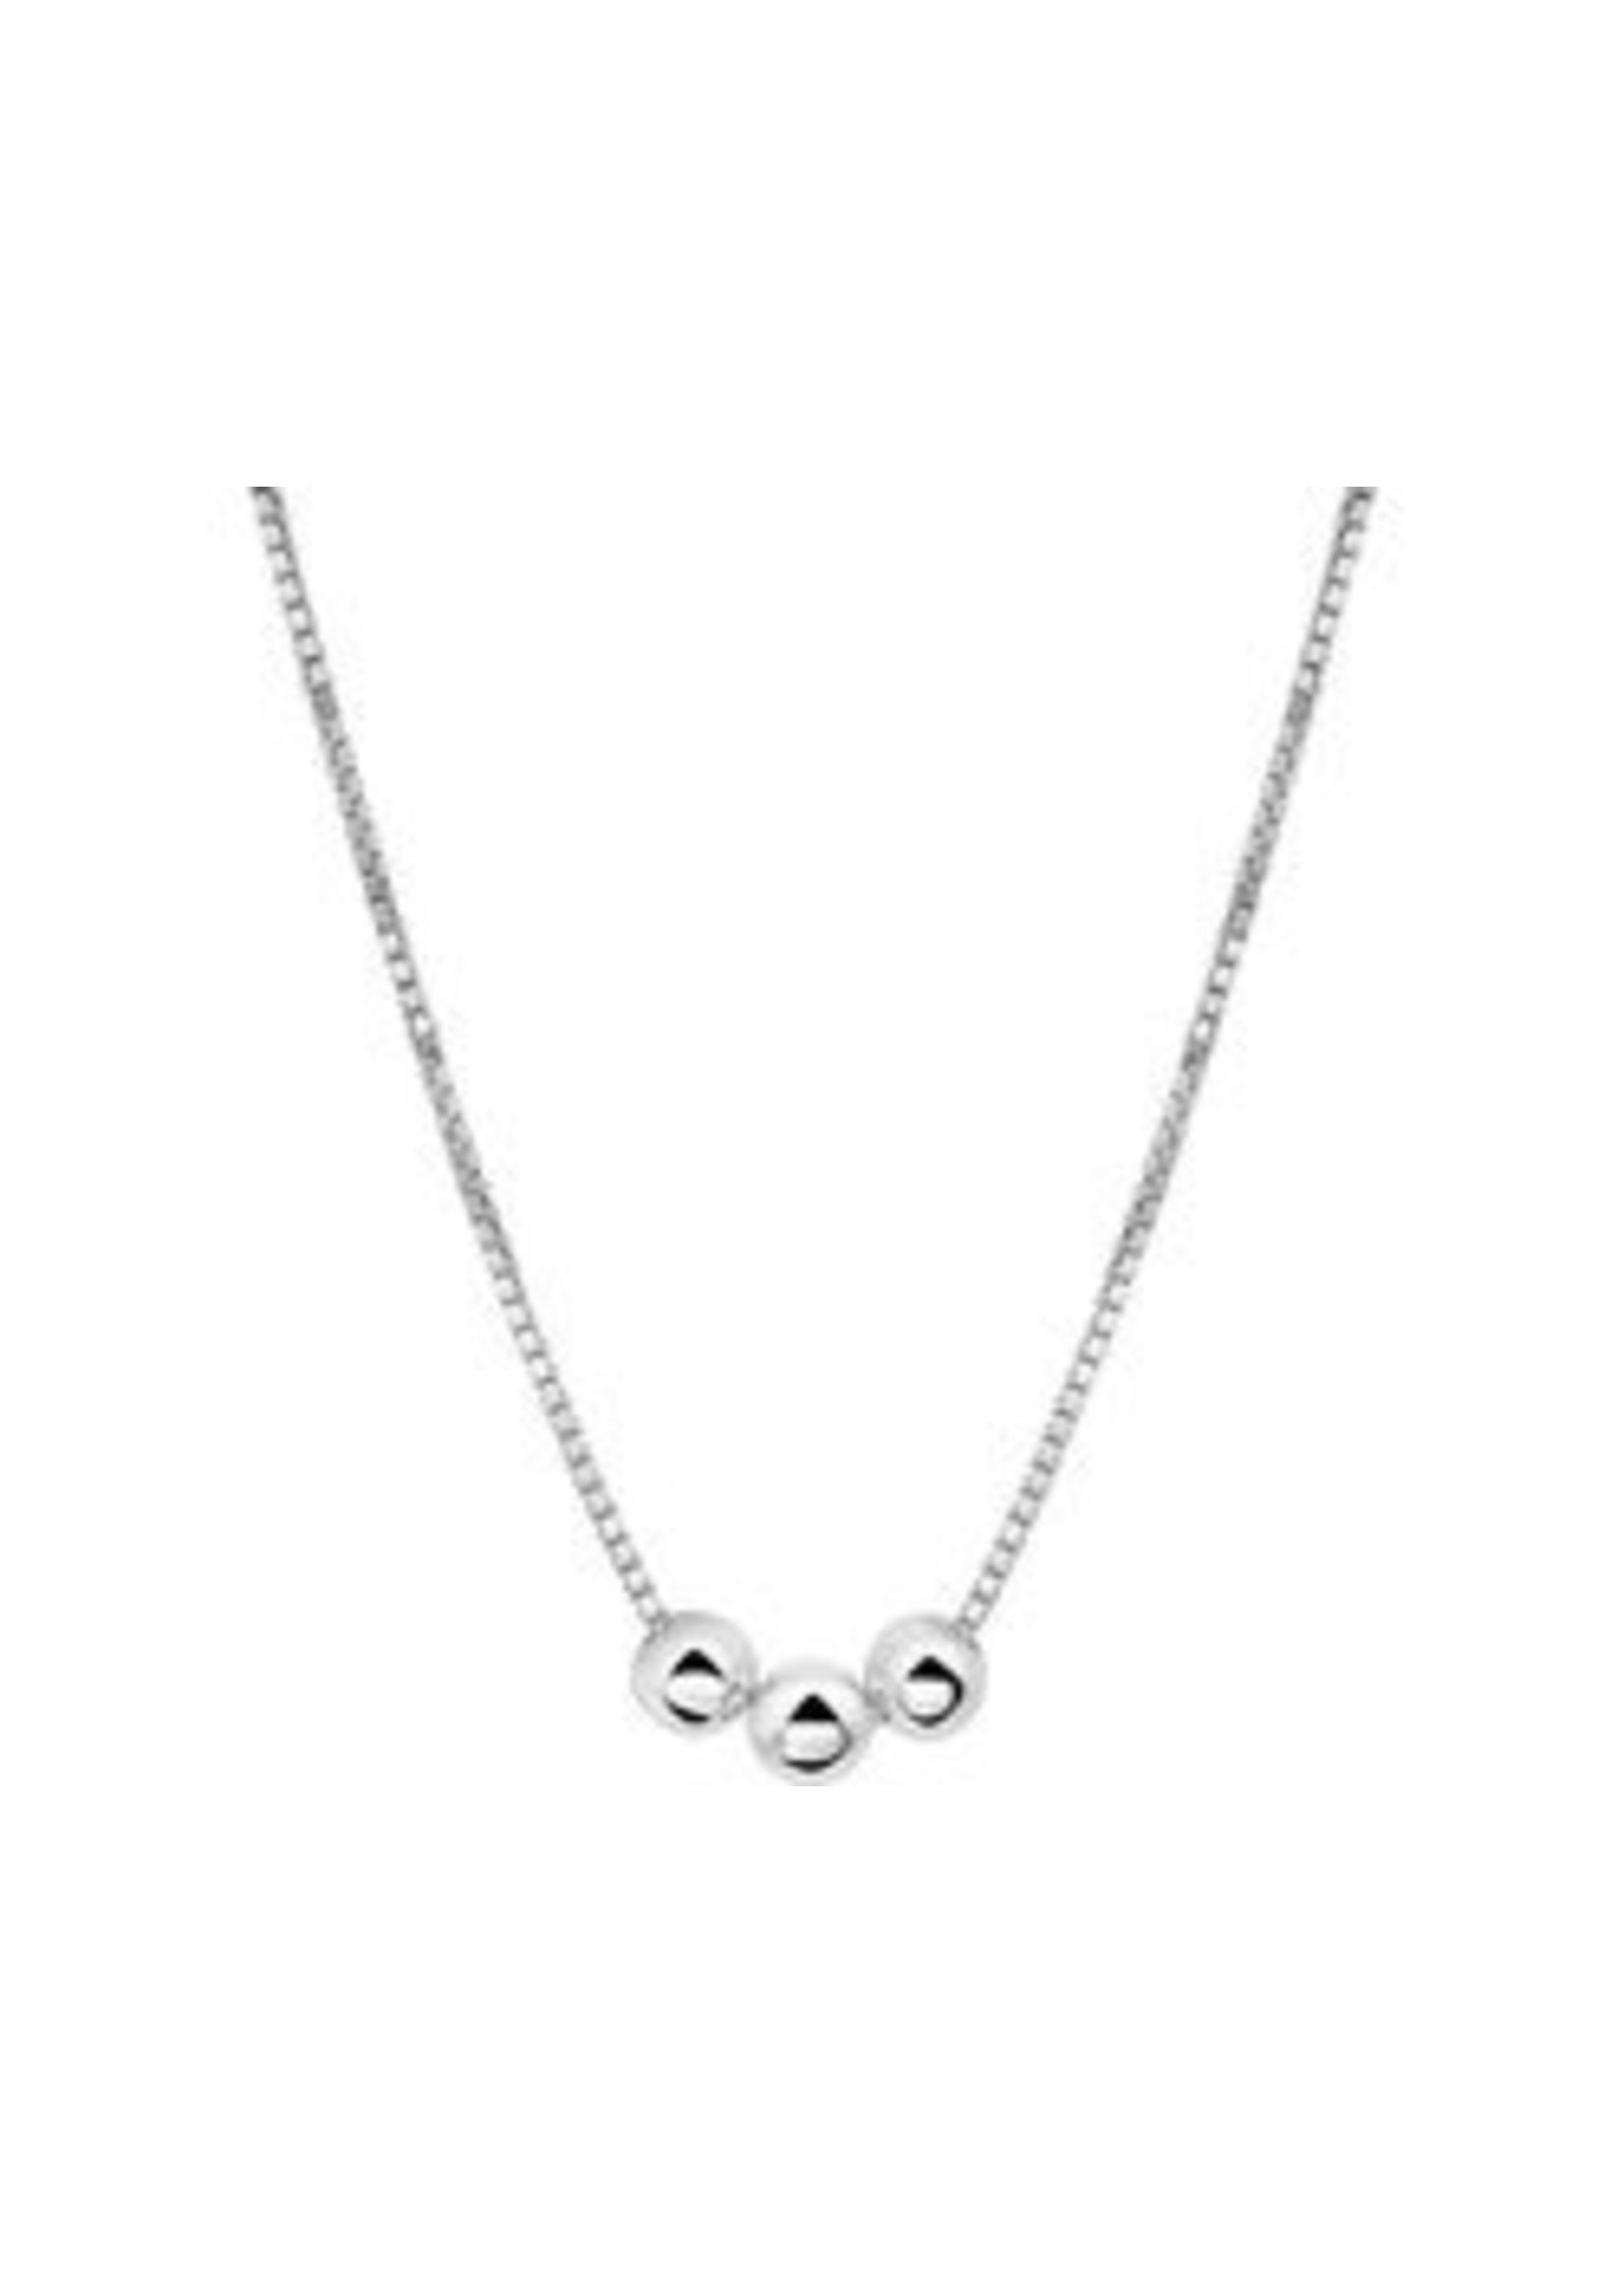 The Fashion Jewelry Collection Ketting Bolletjes 1,0 mm 40 + 5 cm - Zilver